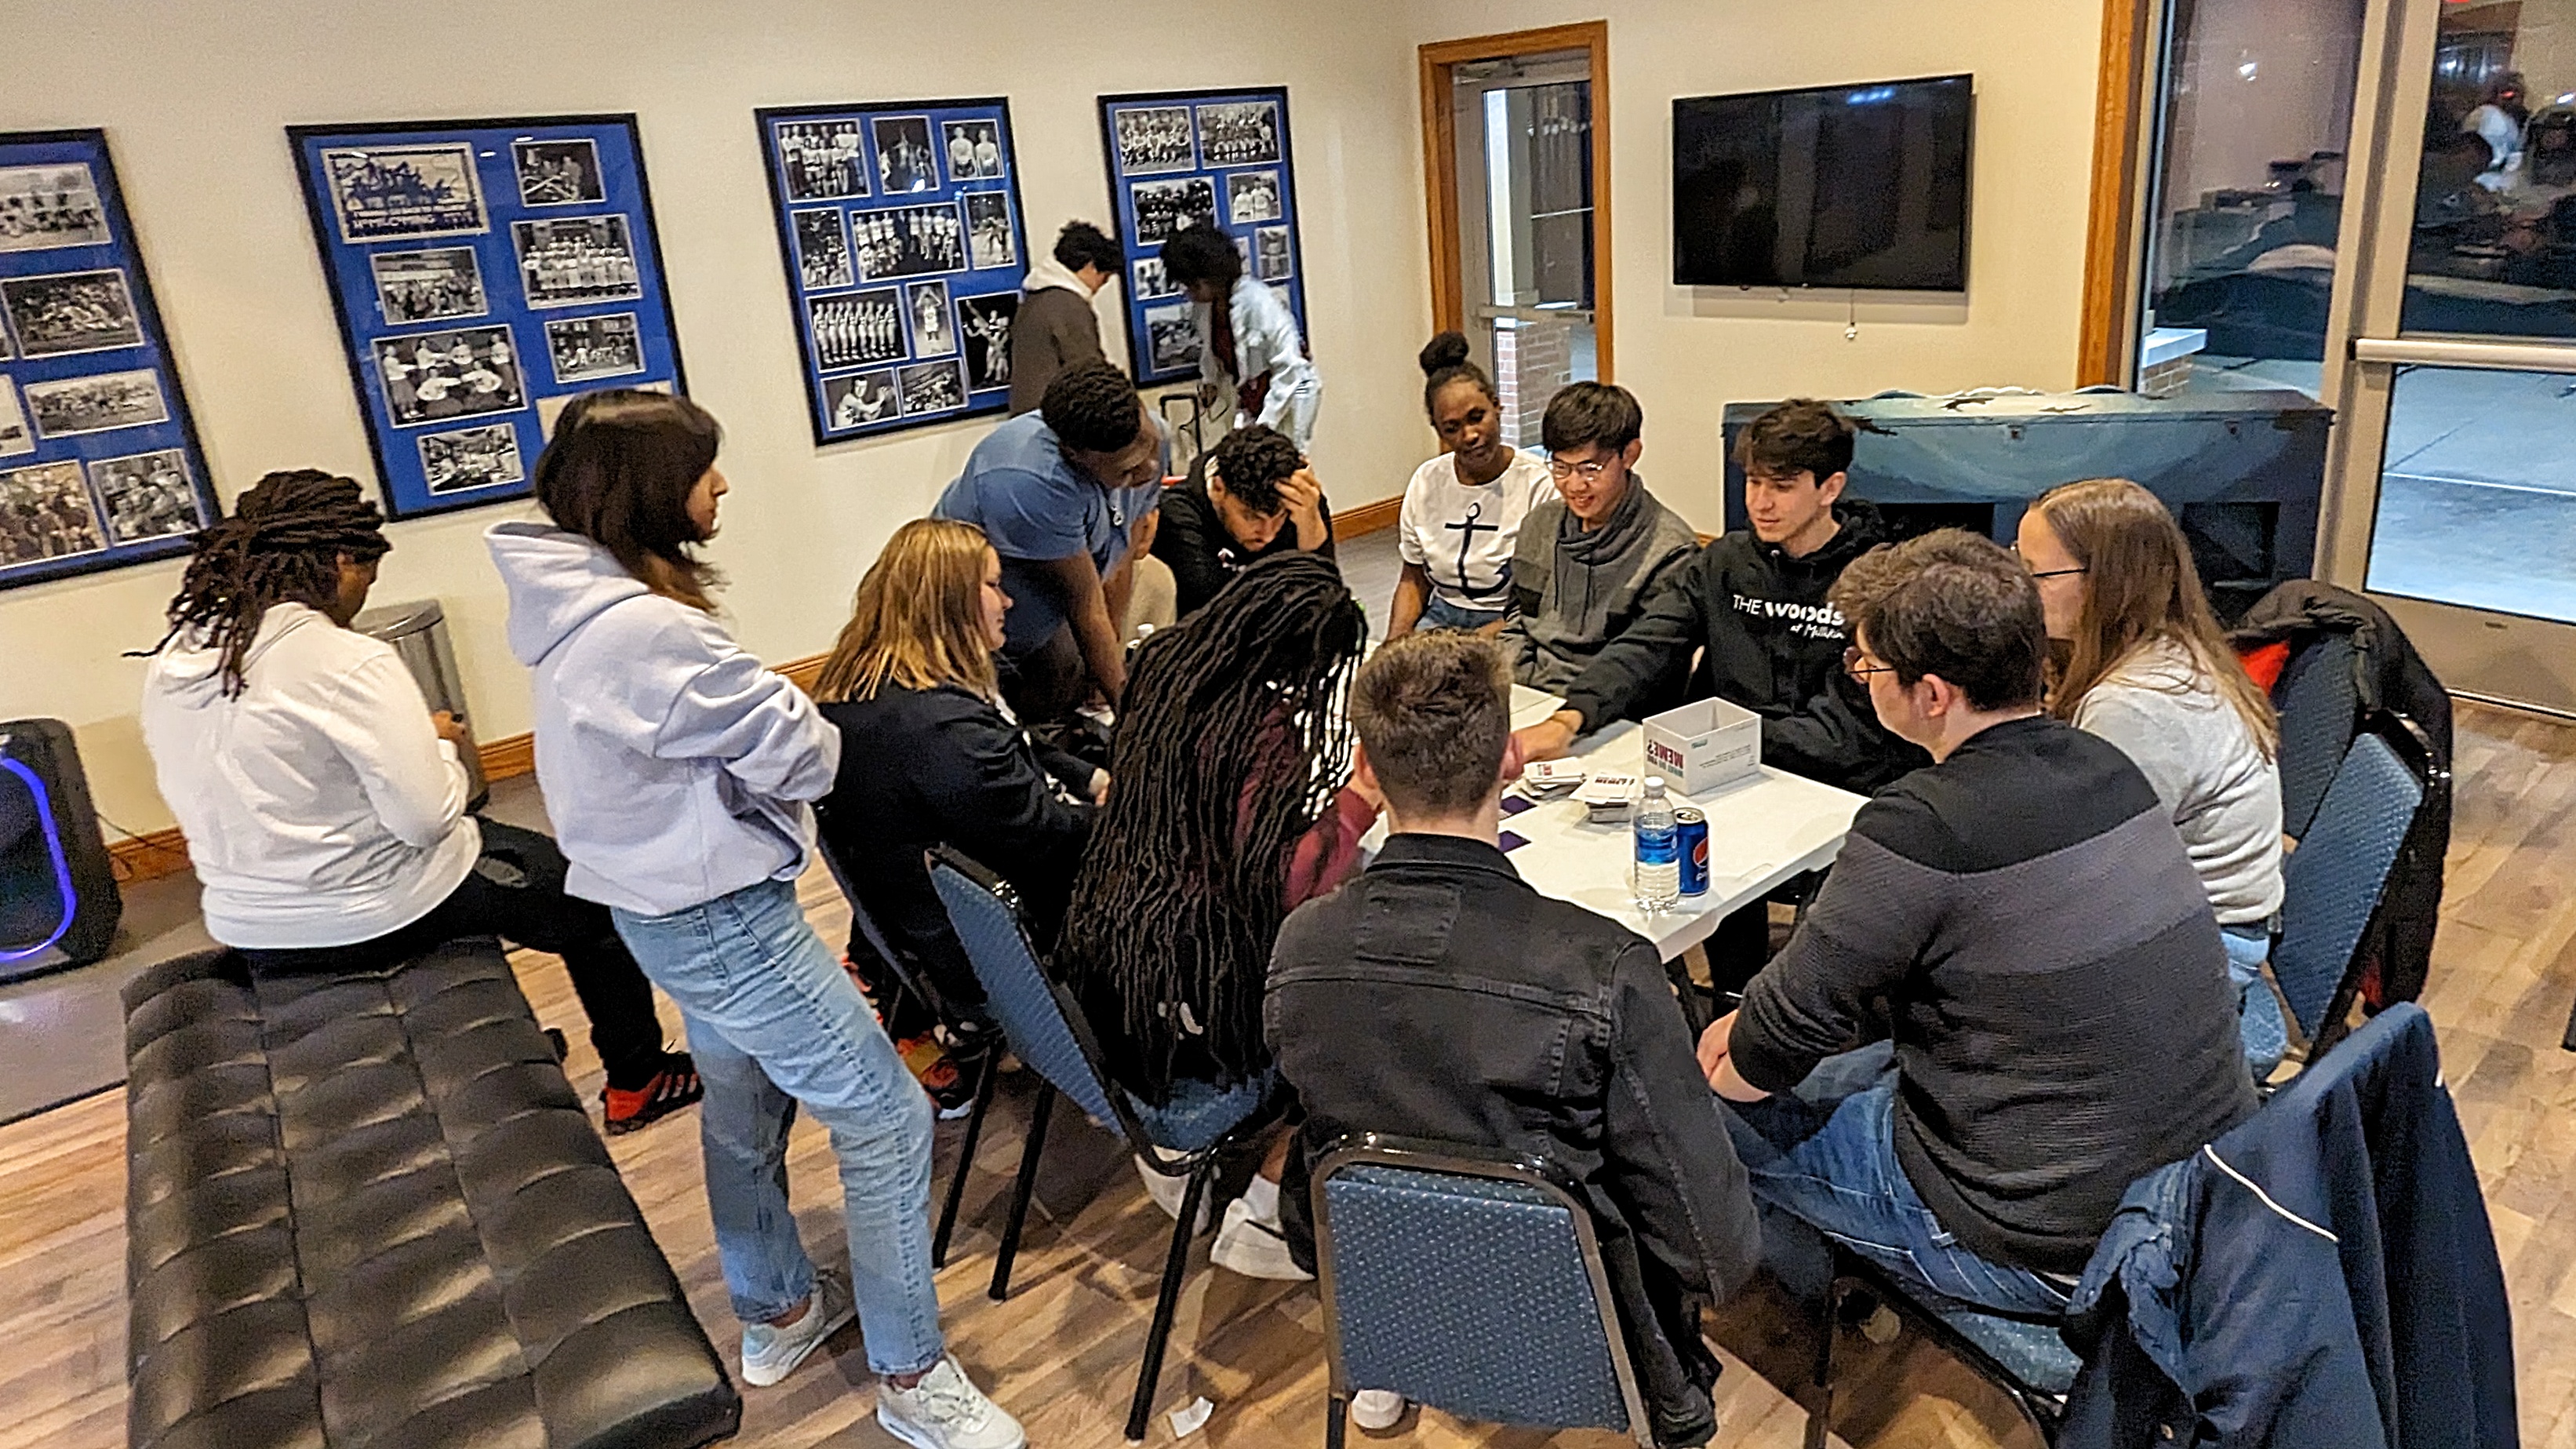 Students sitting at a table playing a card game